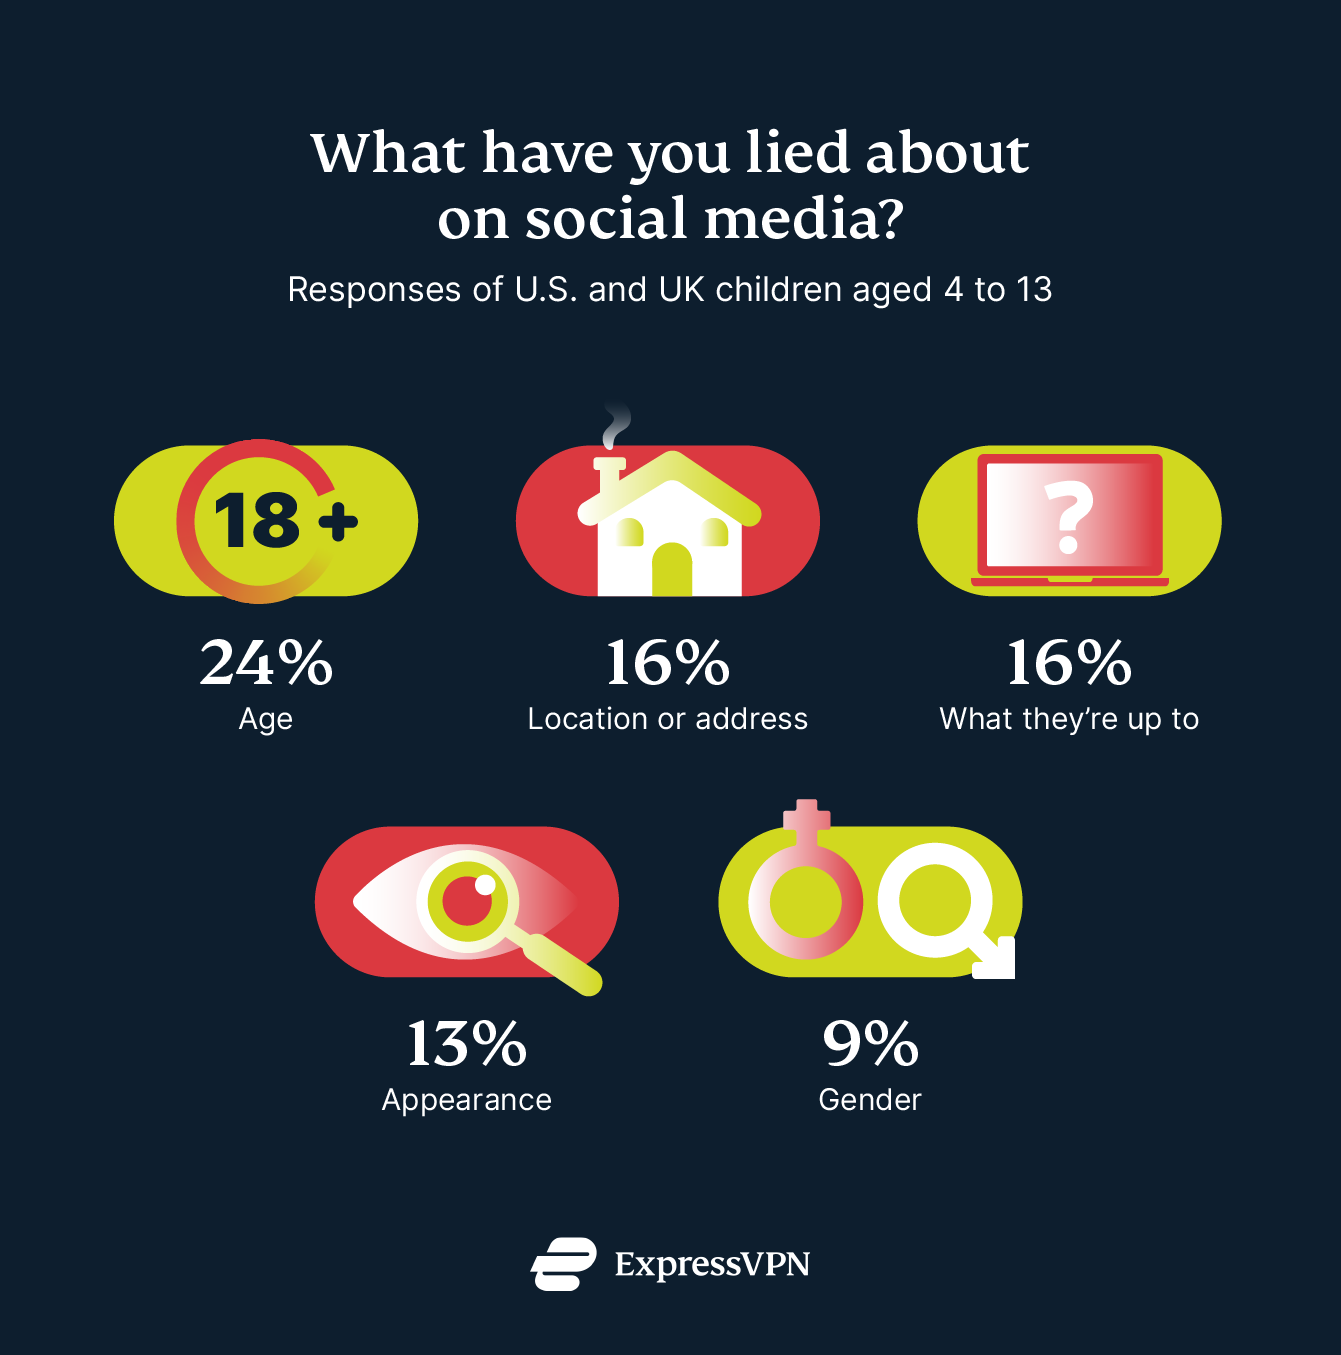 Graph of what childre lie about on social media